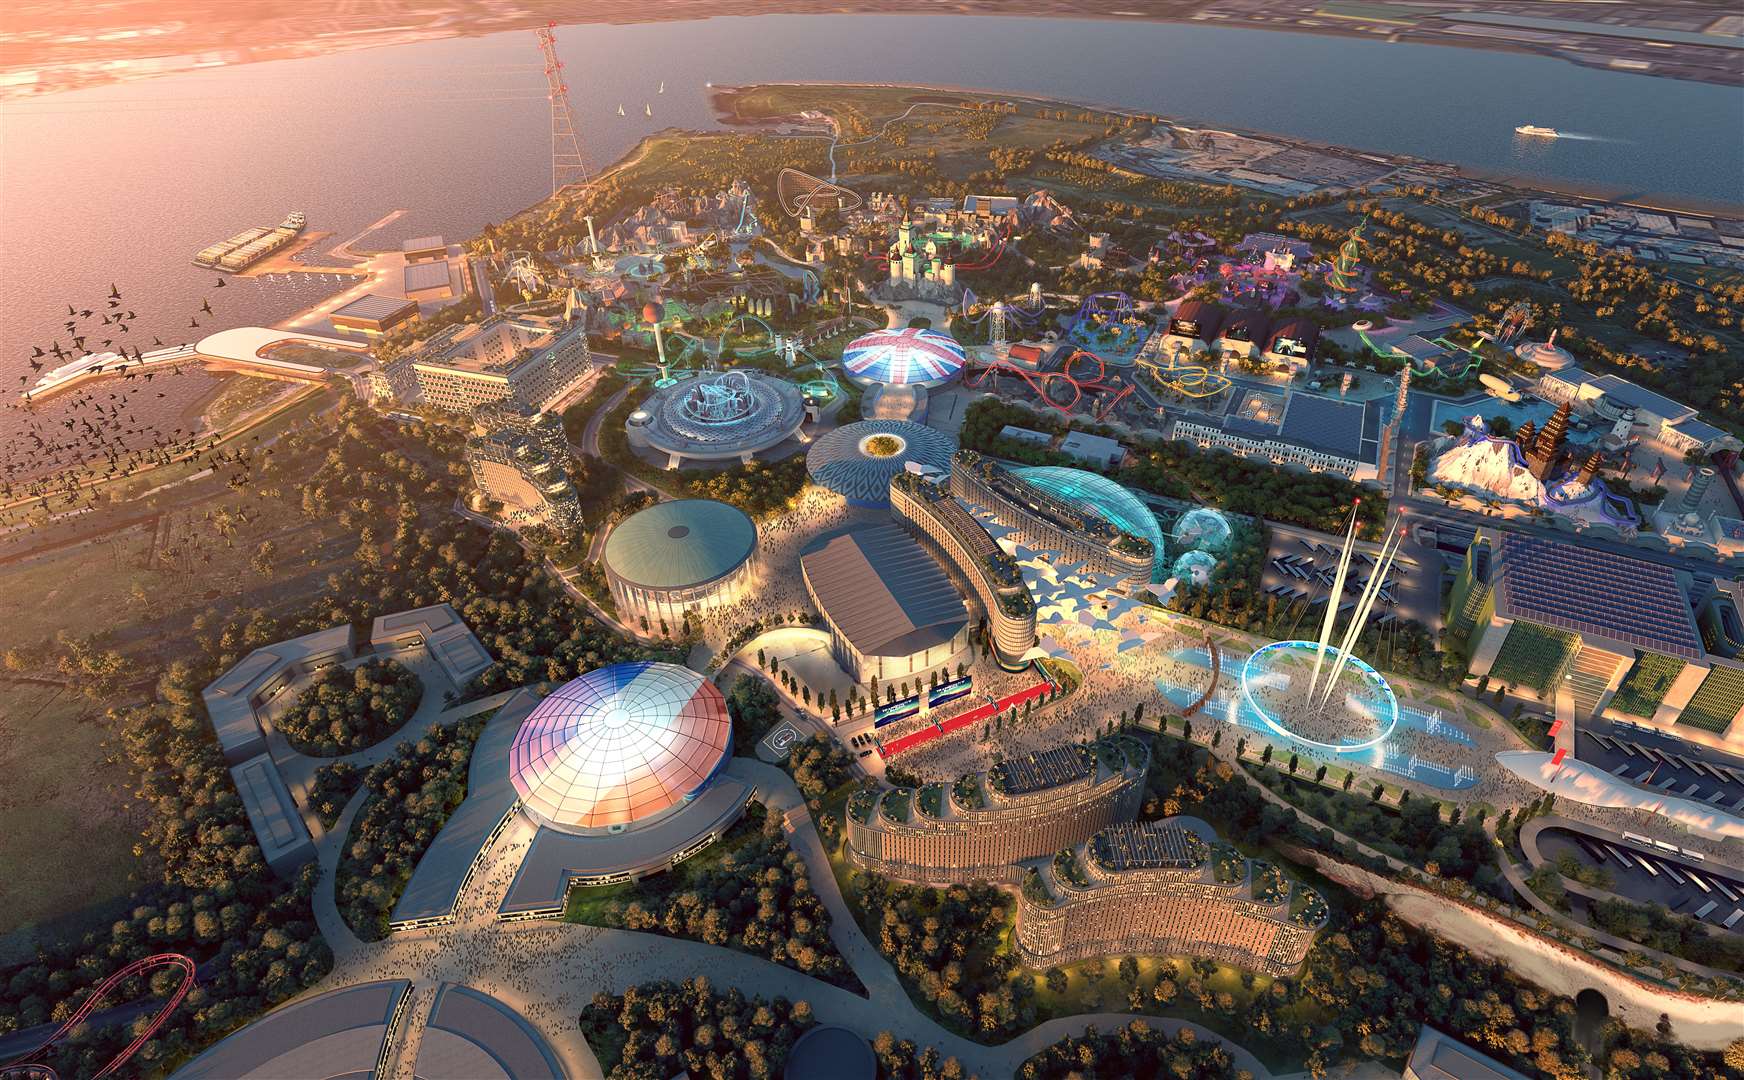 A detailed CGI impression of what the London Resort theme park will look like